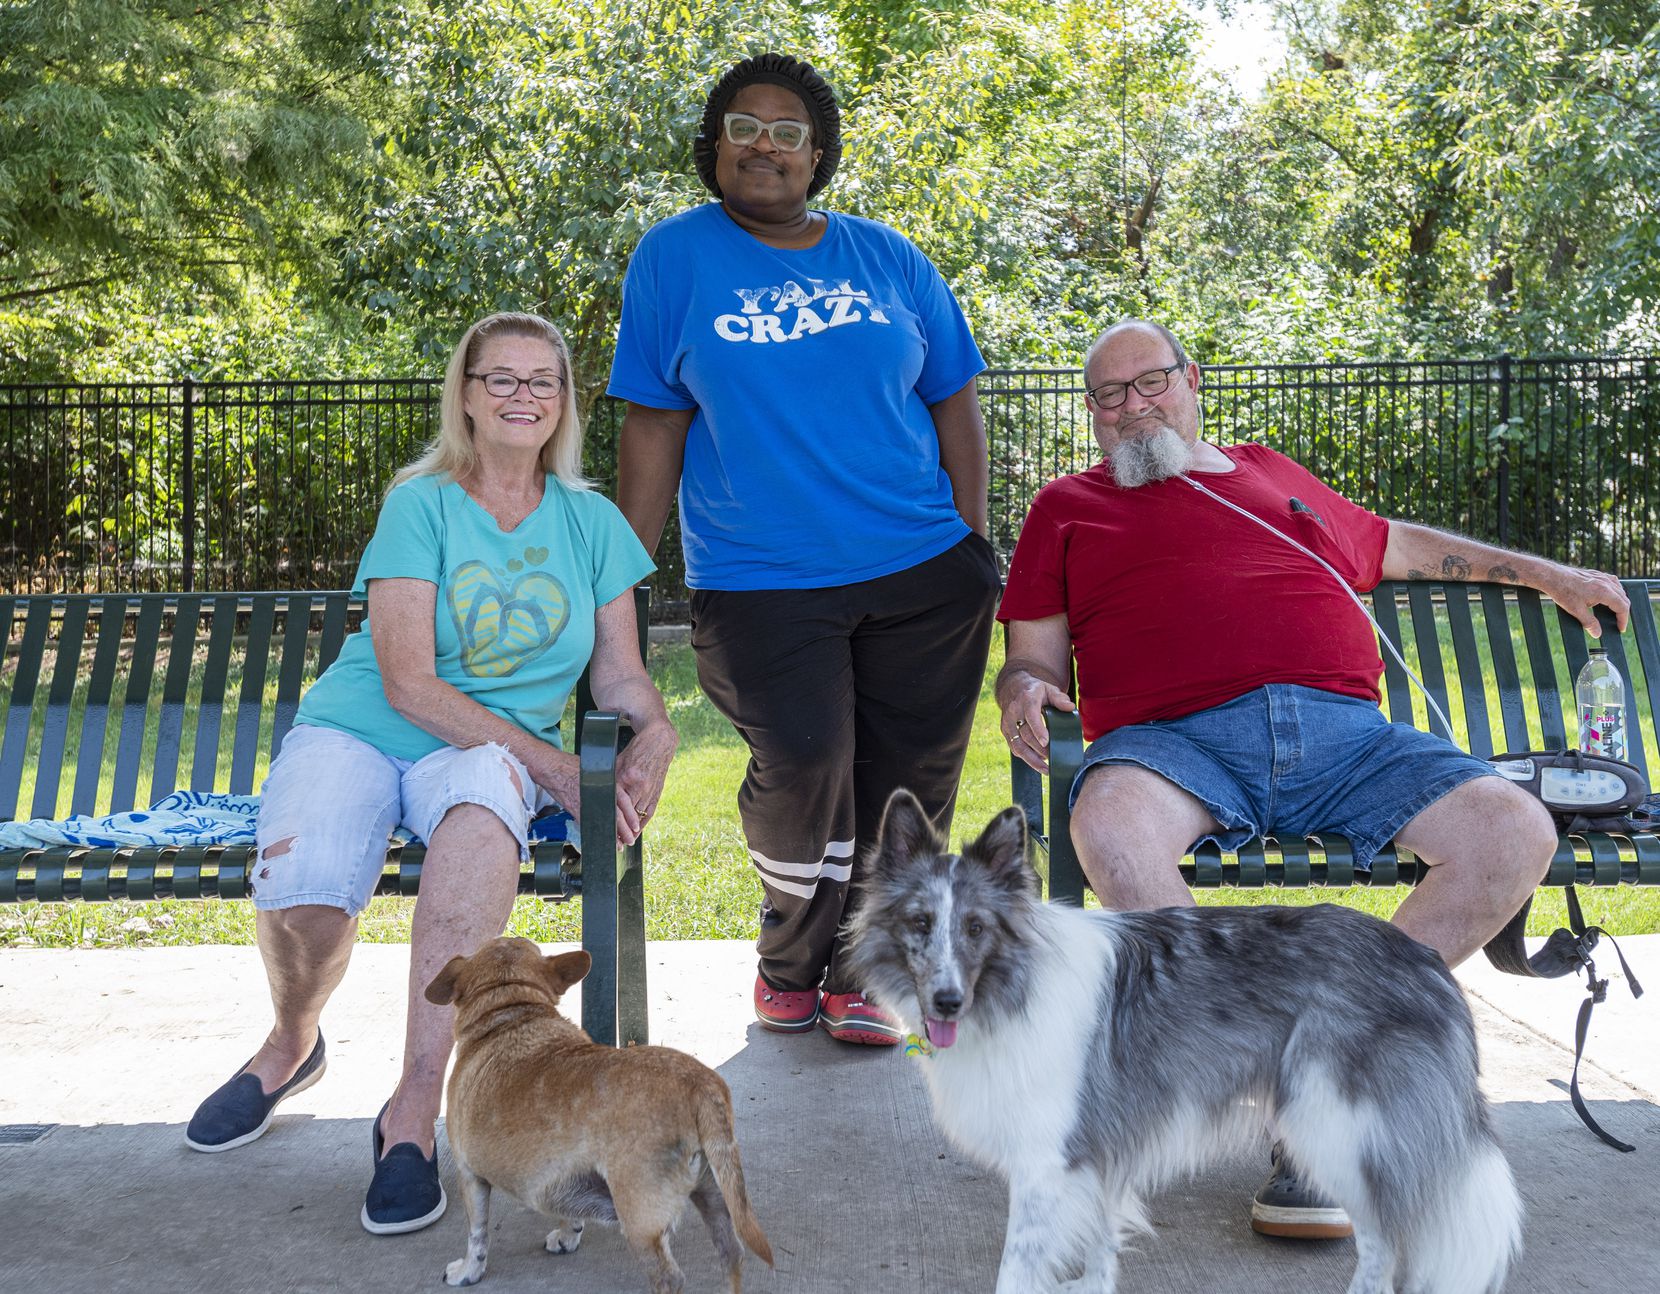 Rebecca Freeman (from left), 77; Tonya Applewhite, 48; and John Almeida, 62, said they support President Joe Biden's vaccine mandate for private-sector employees, health-care workers and federal contractors. They are shown at White Rock Lake's dog park on Friday, Sept. 10, 2021.